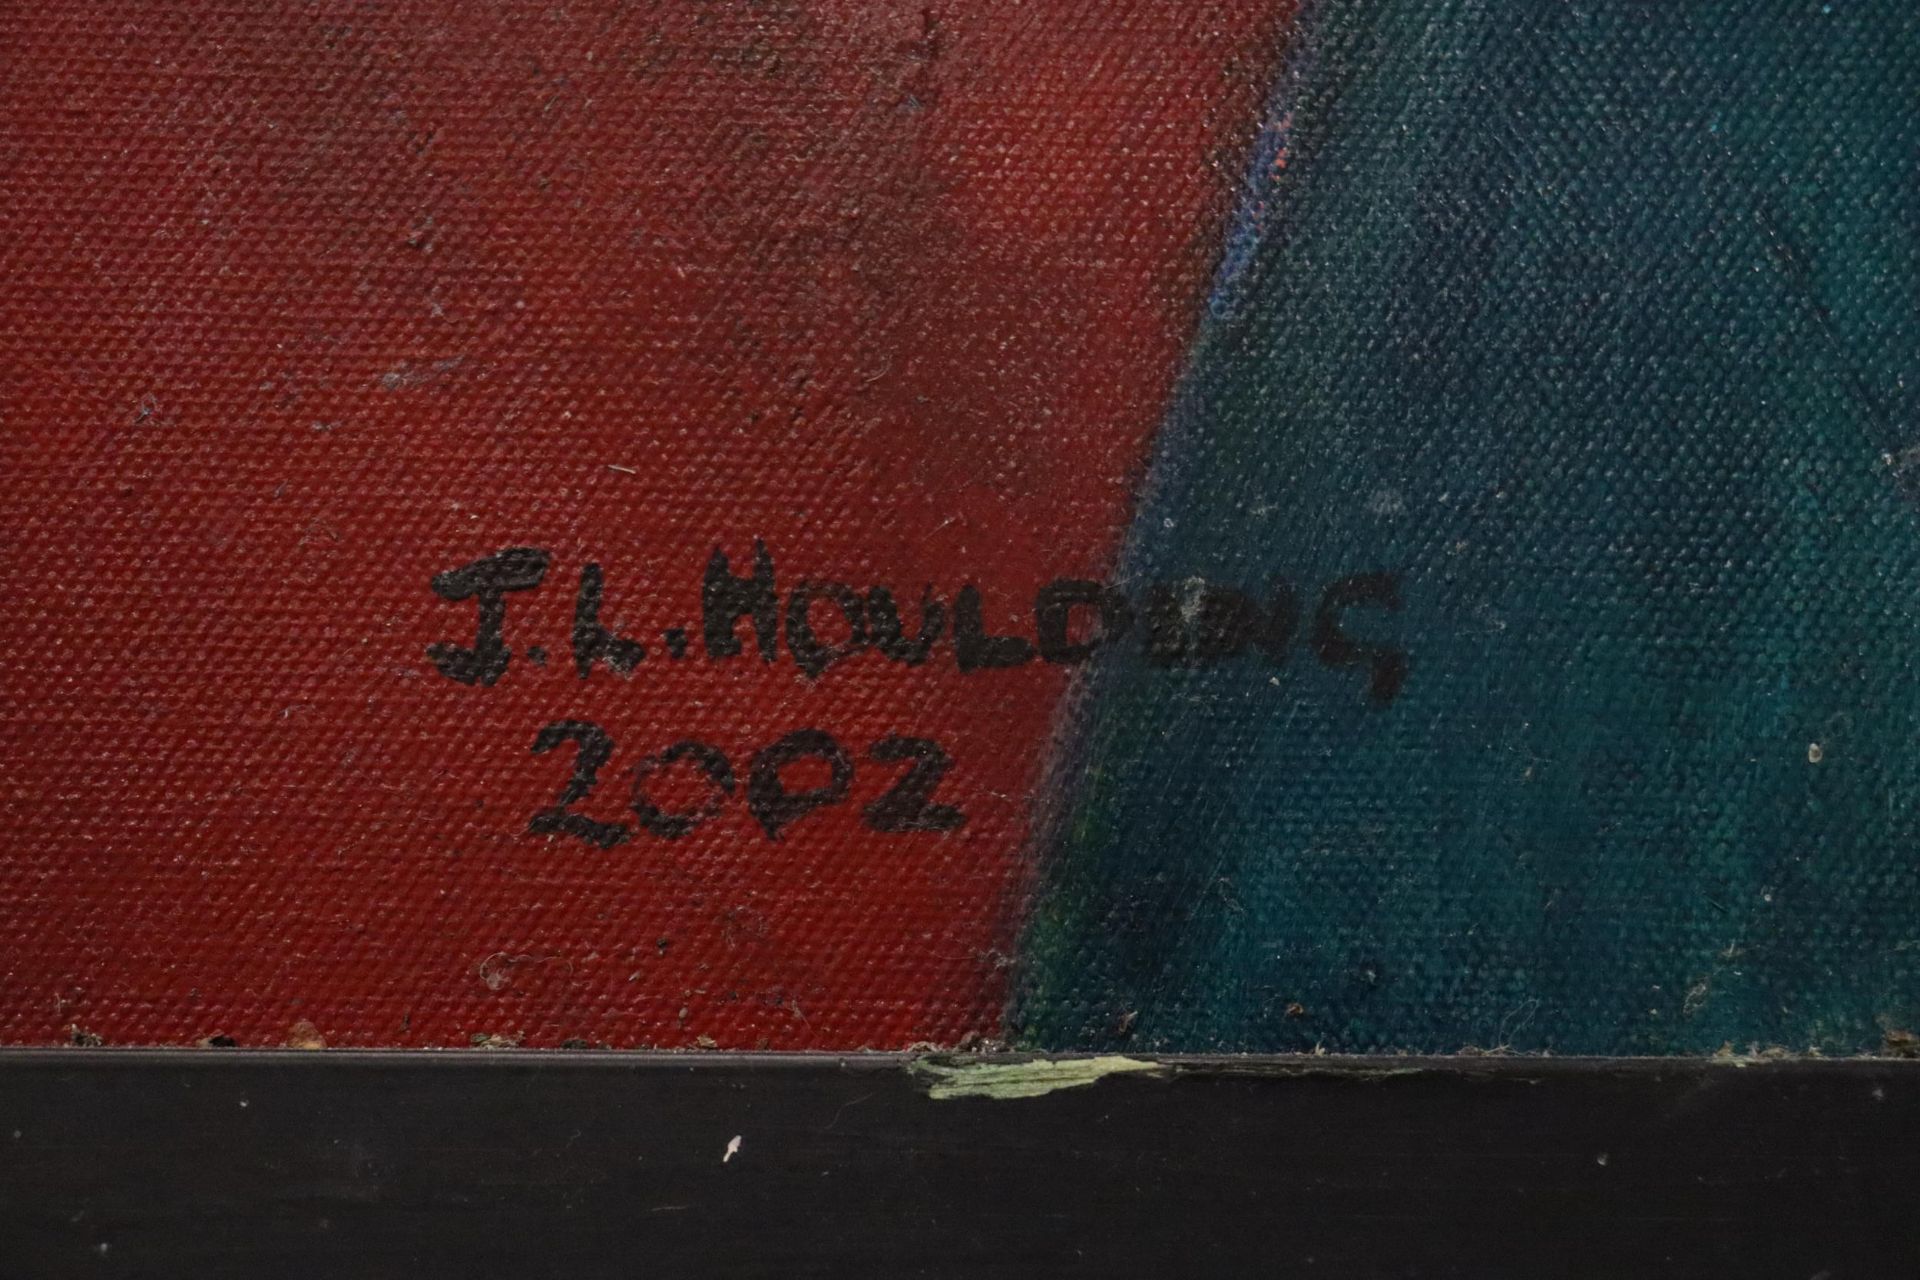 AN ABSTRACT OIL ON CANVAS, SIGNED J L HOULDING, 2002, 80CM X 80CM - Image 3 of 6